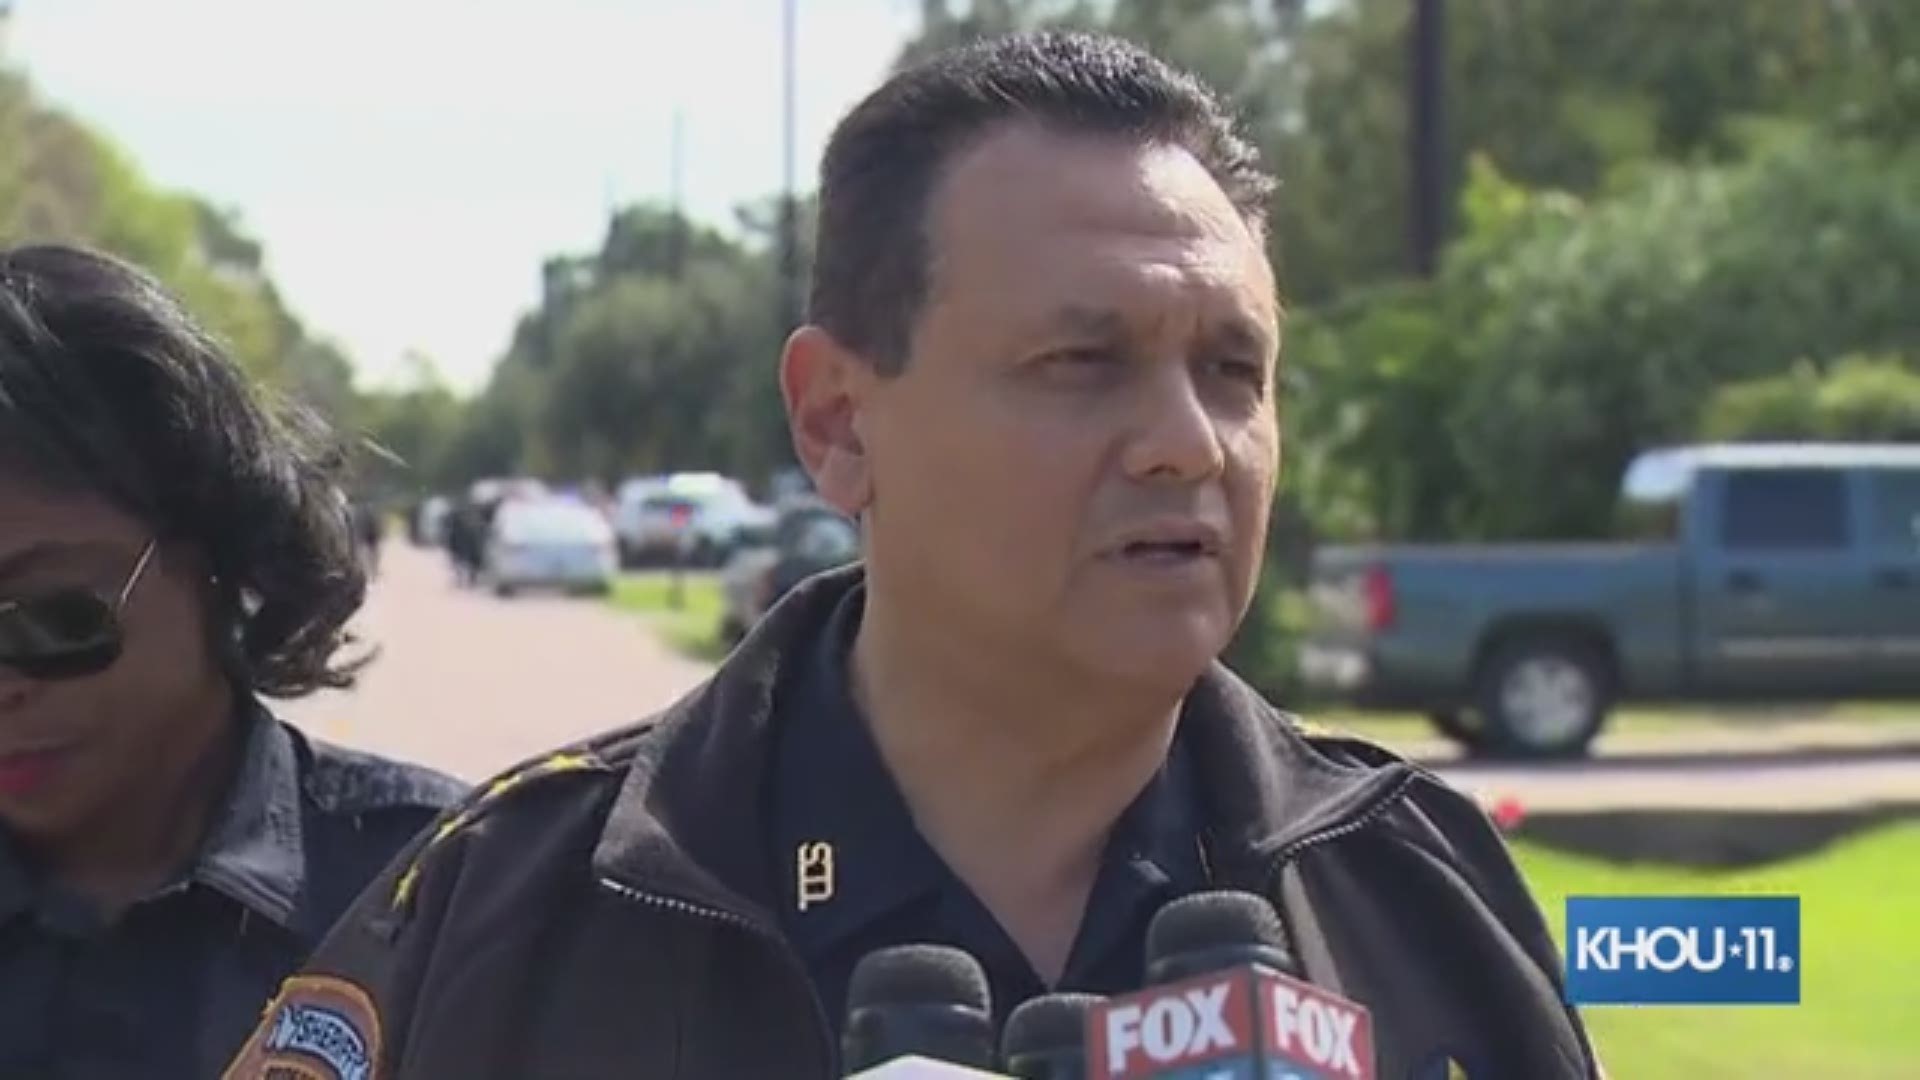 The child was transported in critical condition, according to Sheriff Ed Gonzalez.